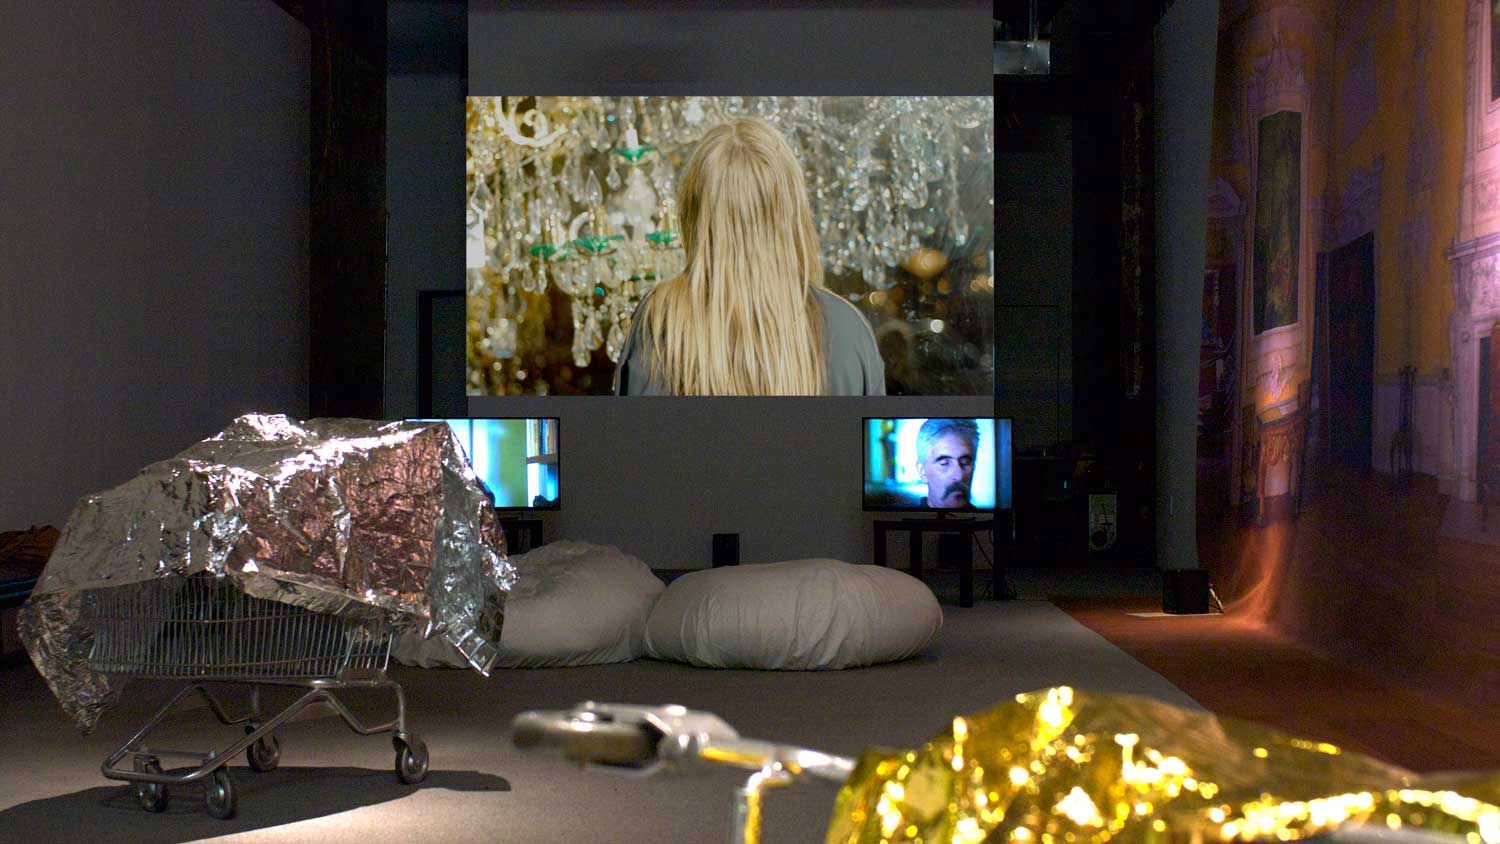 Erik Moskowitz and Amanda Trager, *Two Russians in the Free World*. Installation view